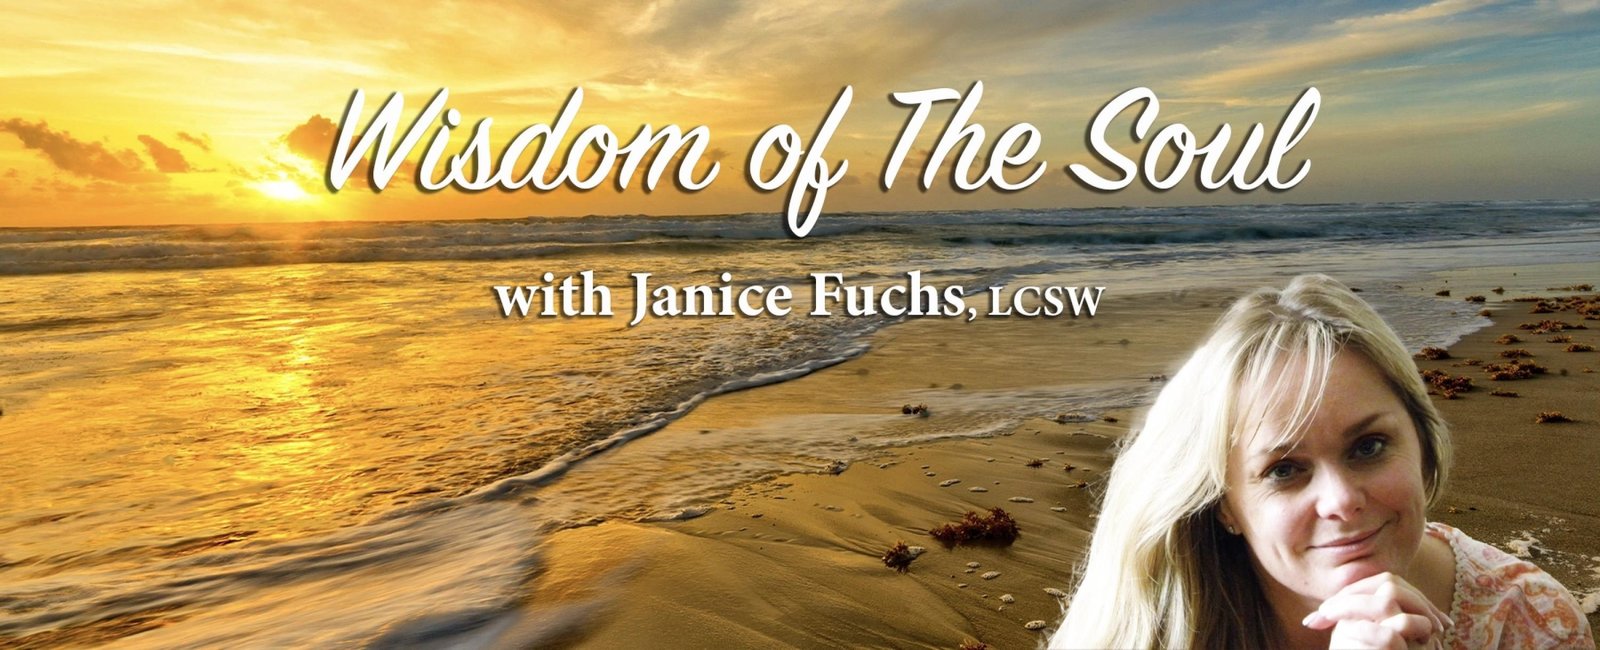 Wisdom of The Soul cover photo